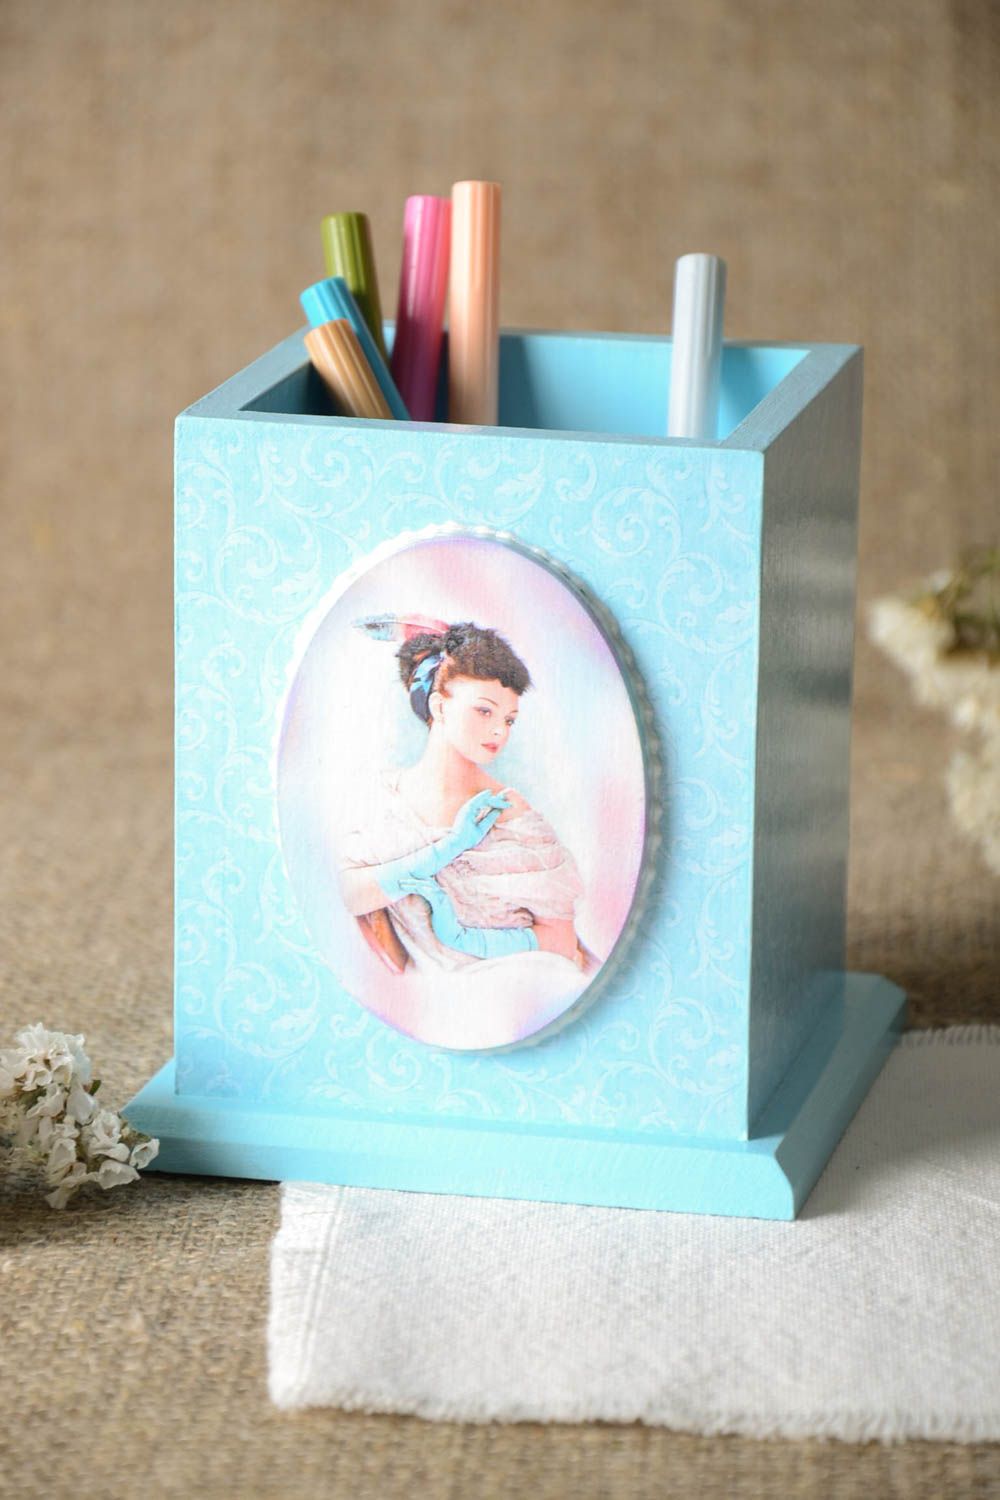 Handmade wooden pencil holder stationery ideas pen and pencil gift ideas photo 1